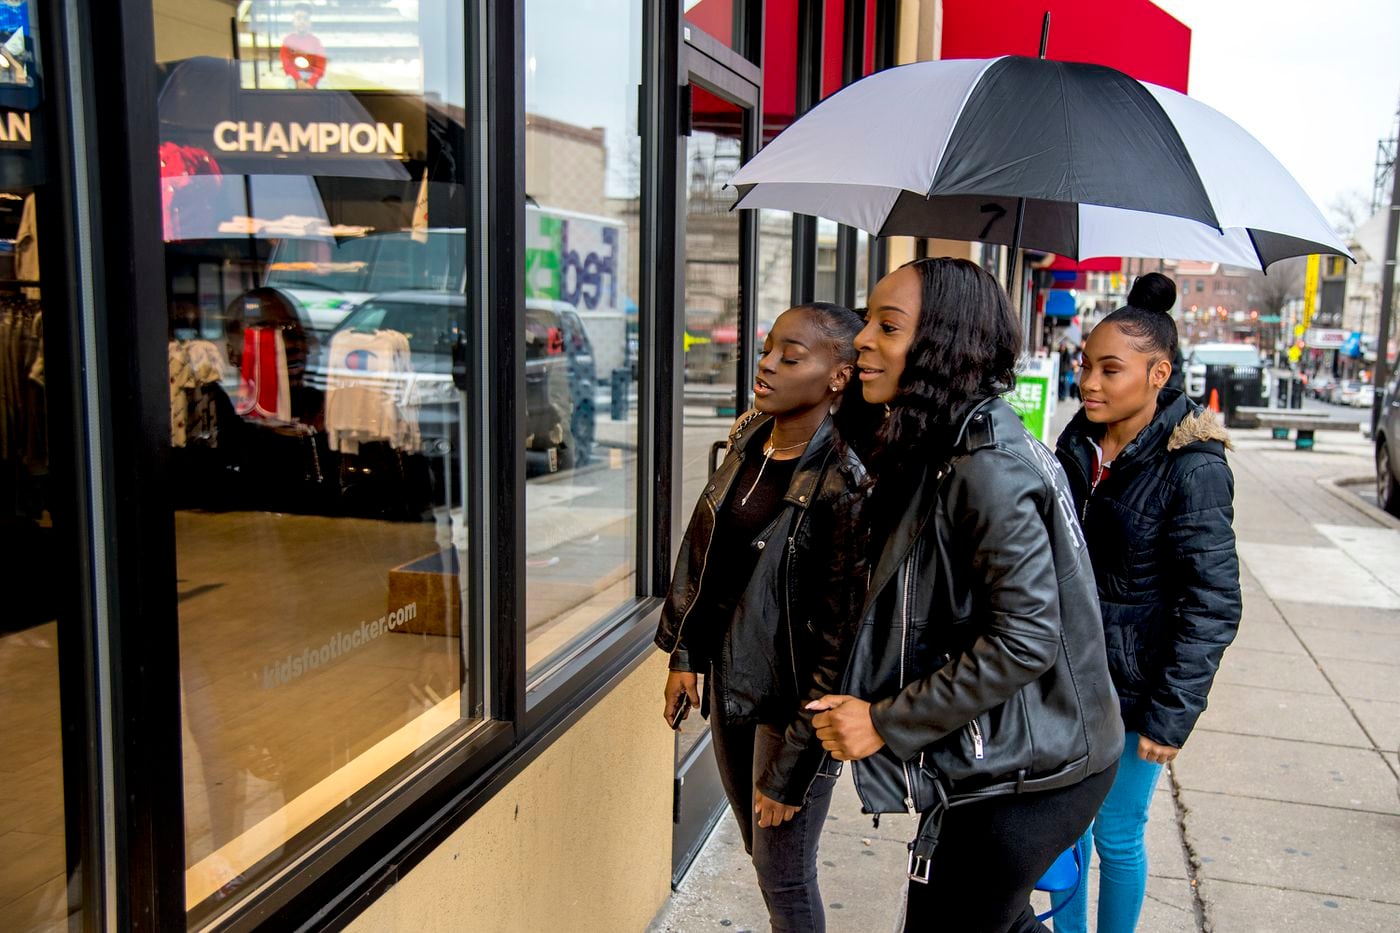 Years ago, Portia Smith (center) suffered postpartum depression and feared seeking care because of child welfare involvement. She window shops with daughters Nelly Smith (left), 19, and Najai Jones-Smith (right), 15.